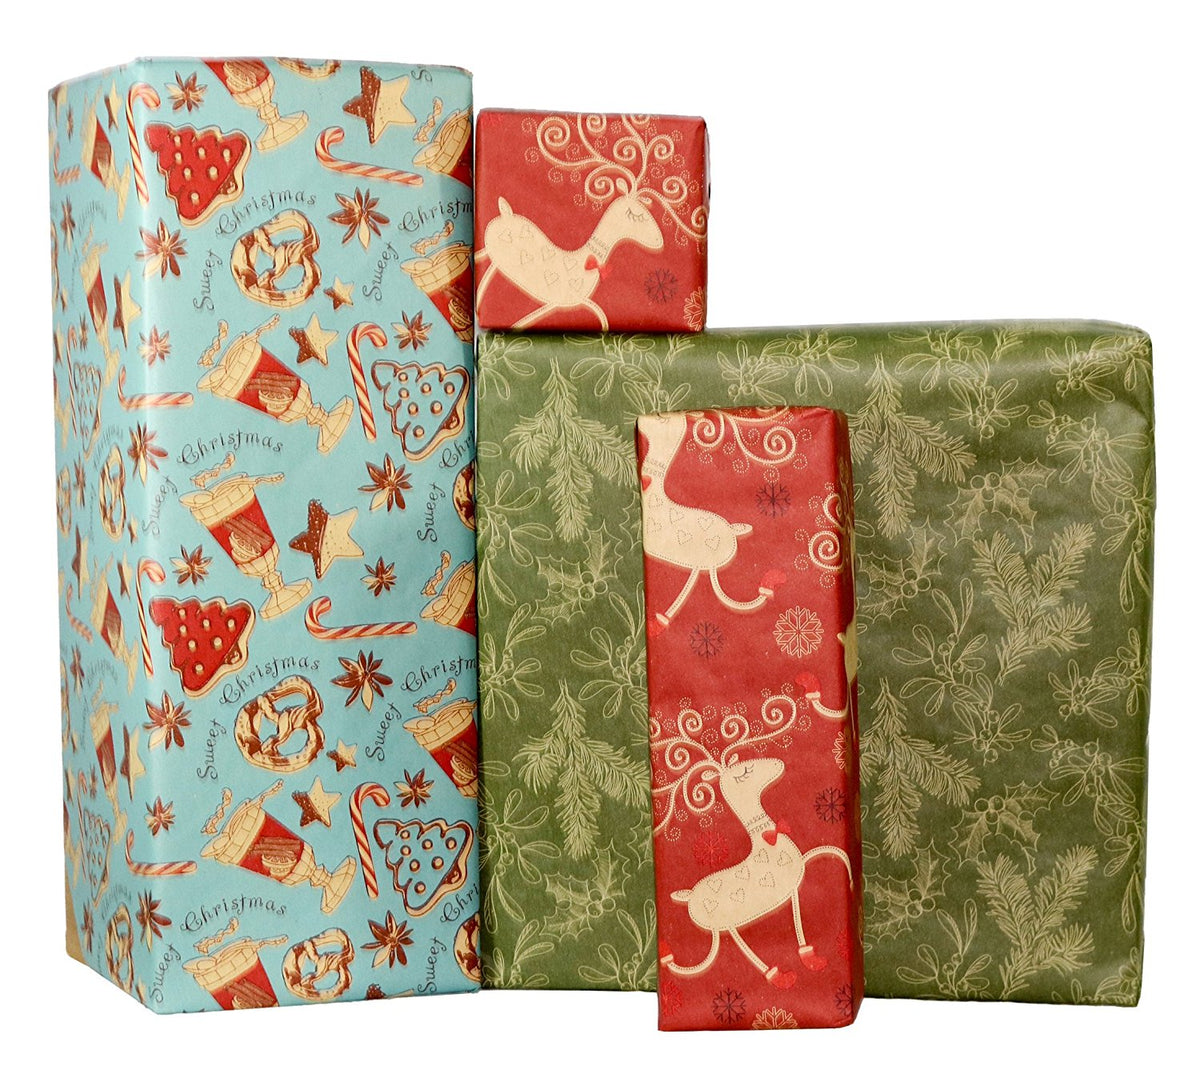 Aimyoo Kraft Christmas Wrapping Paper Set, Vintage Kids Xmas Gift Wrap  Paper Rolls, Stockings Candy Canes Santa Deers Snowman Skating Shoes  Designs,17